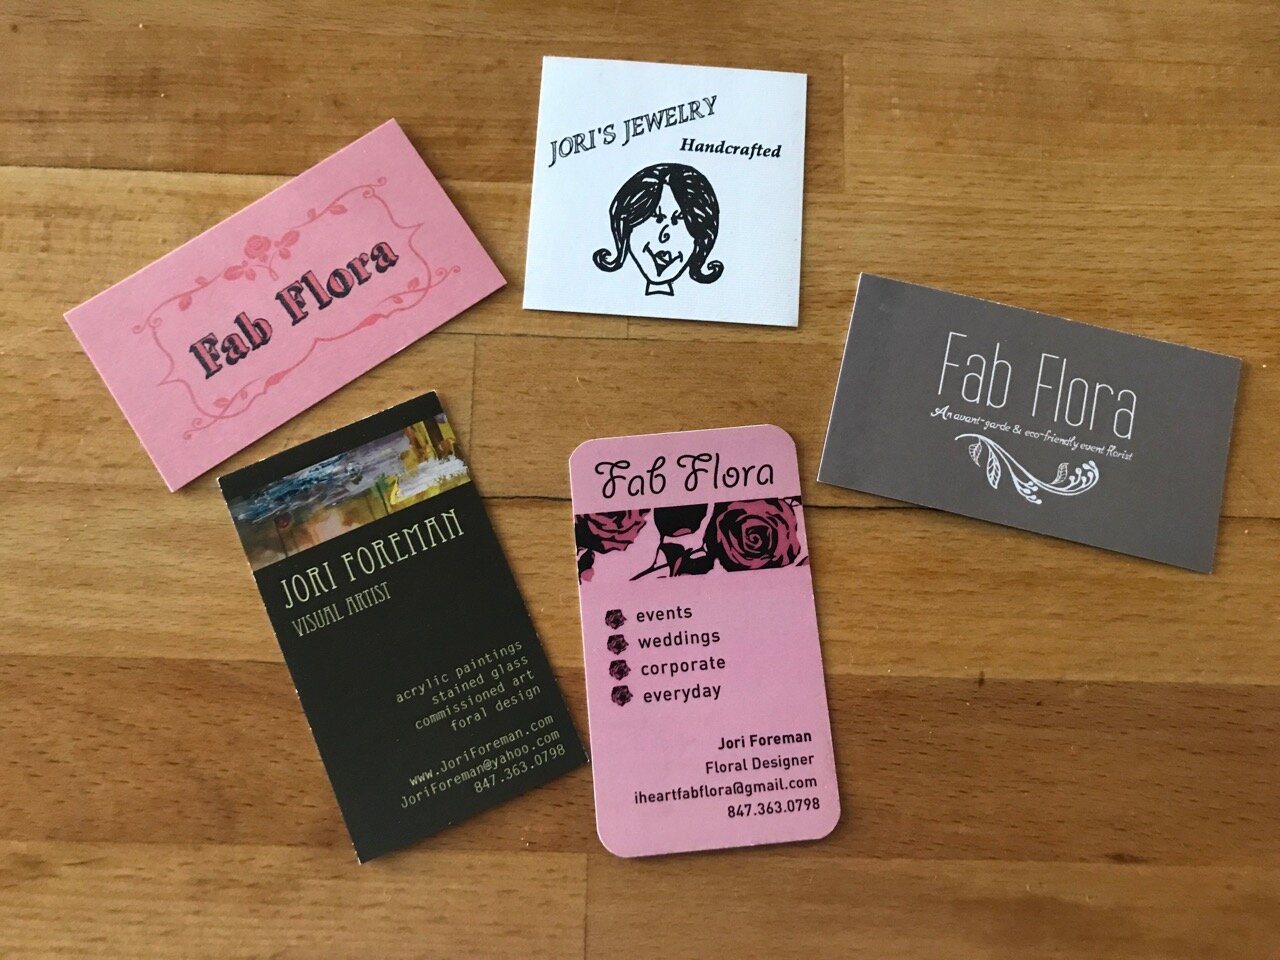 Romee-Willow-Florals-Fab-Flora-business-cards